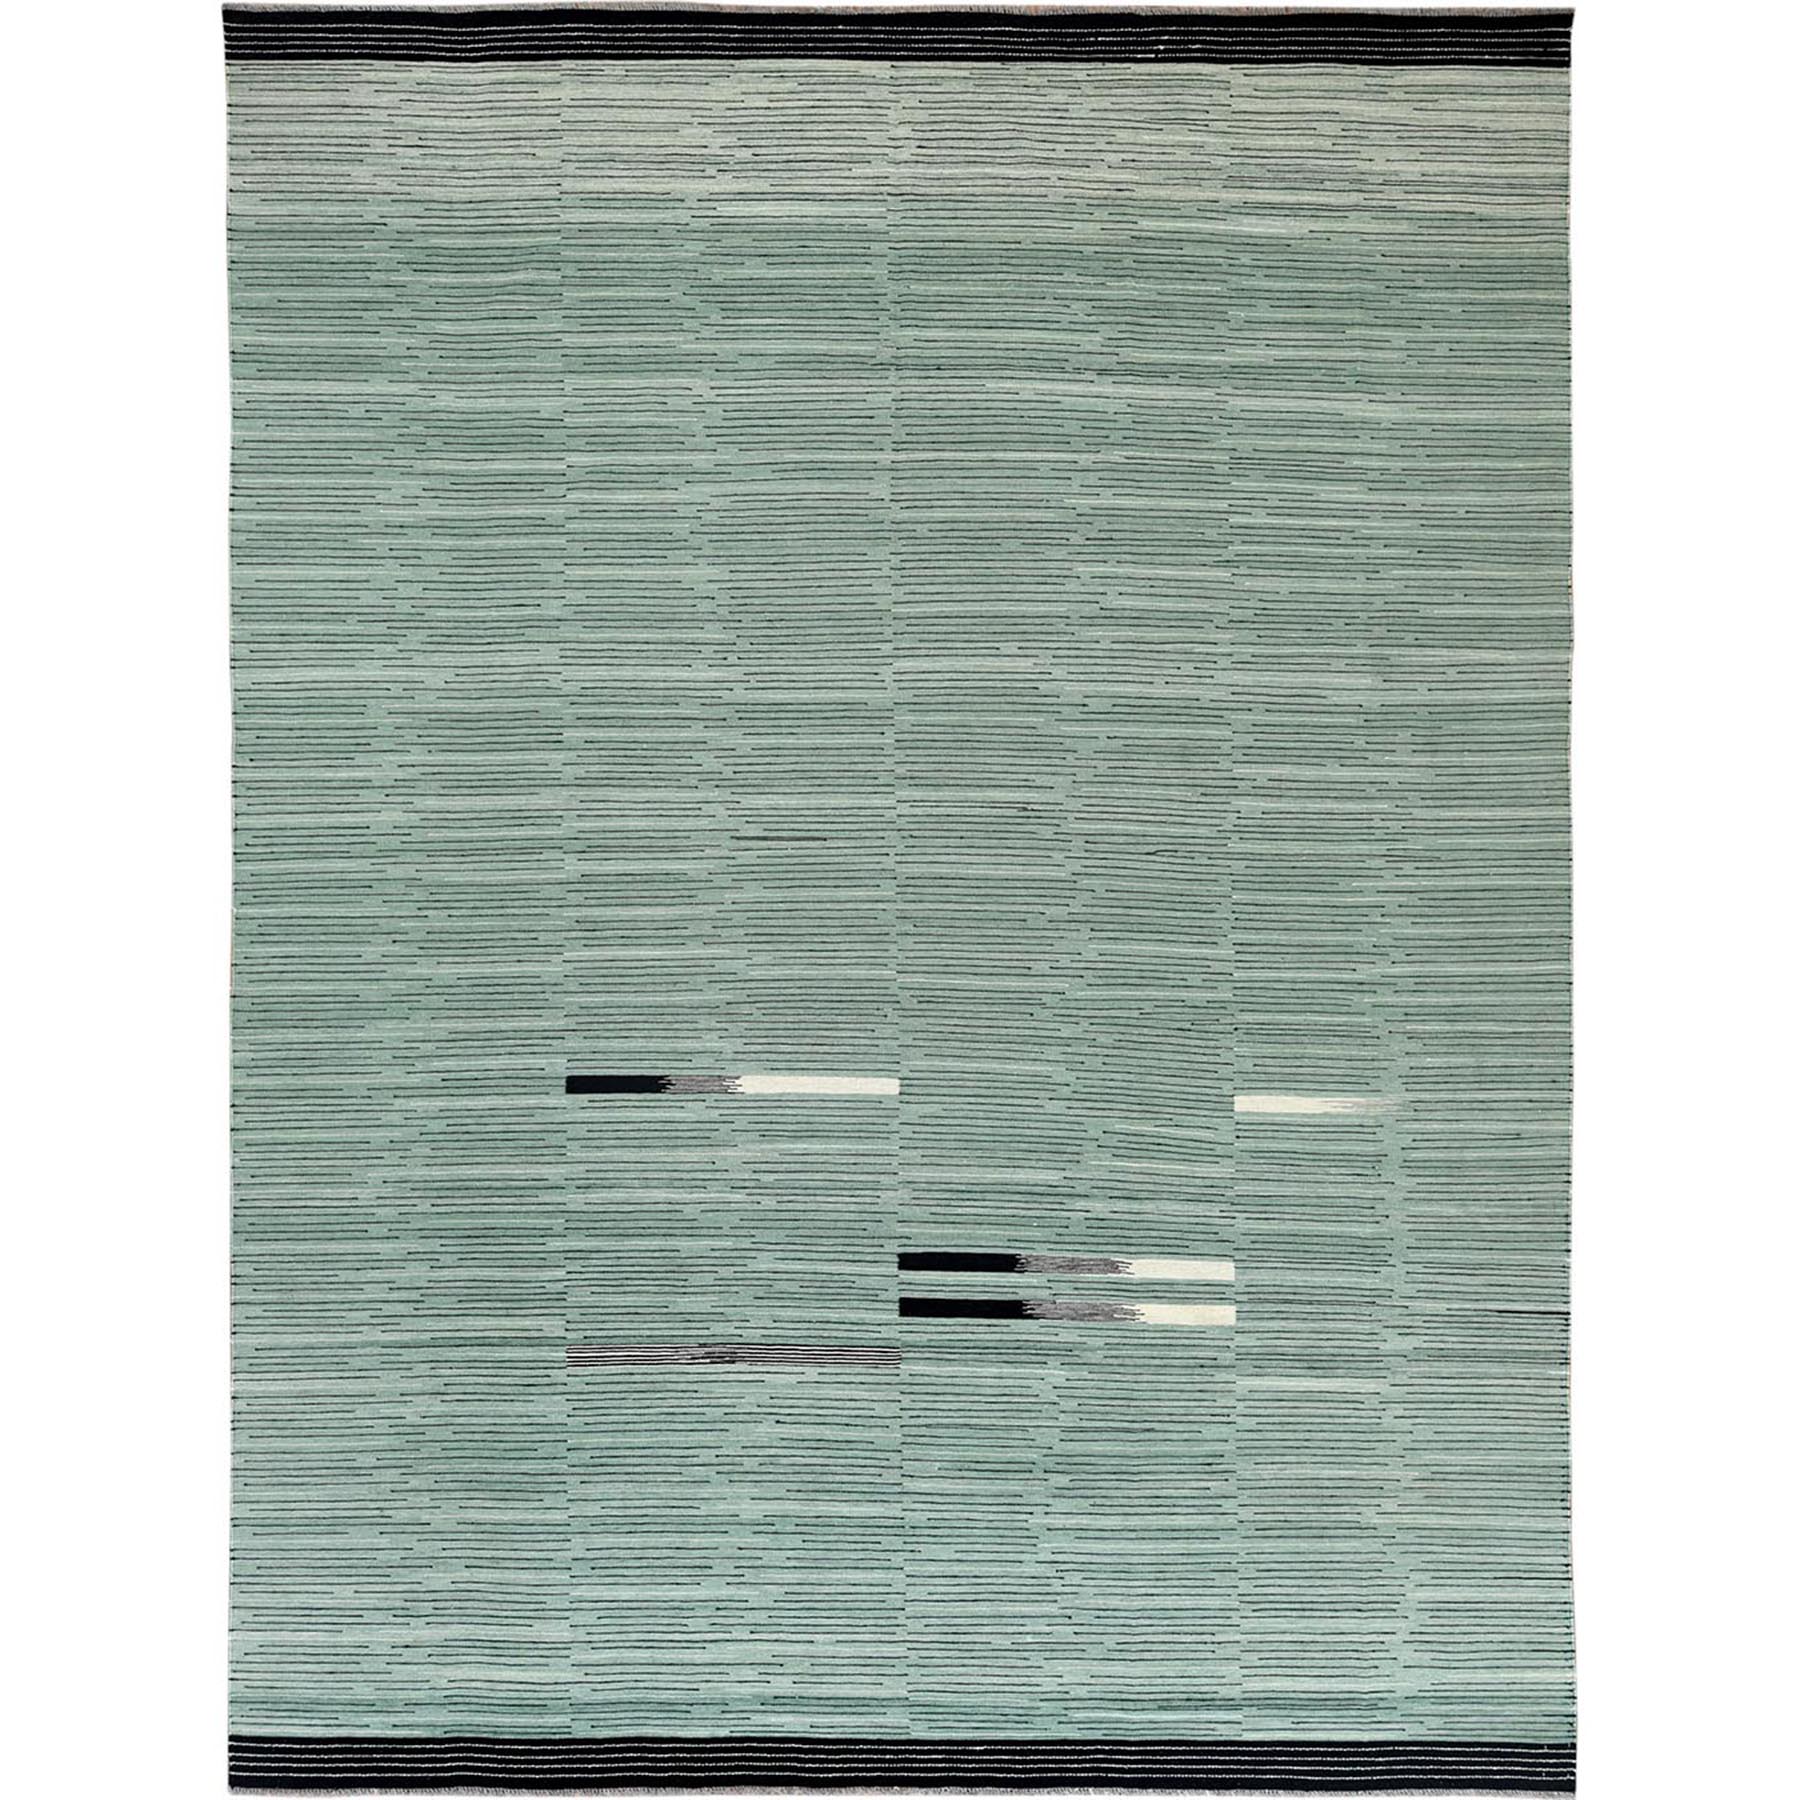 Modern & Contemporary Wool Hand-Woven Area Rug 10'2